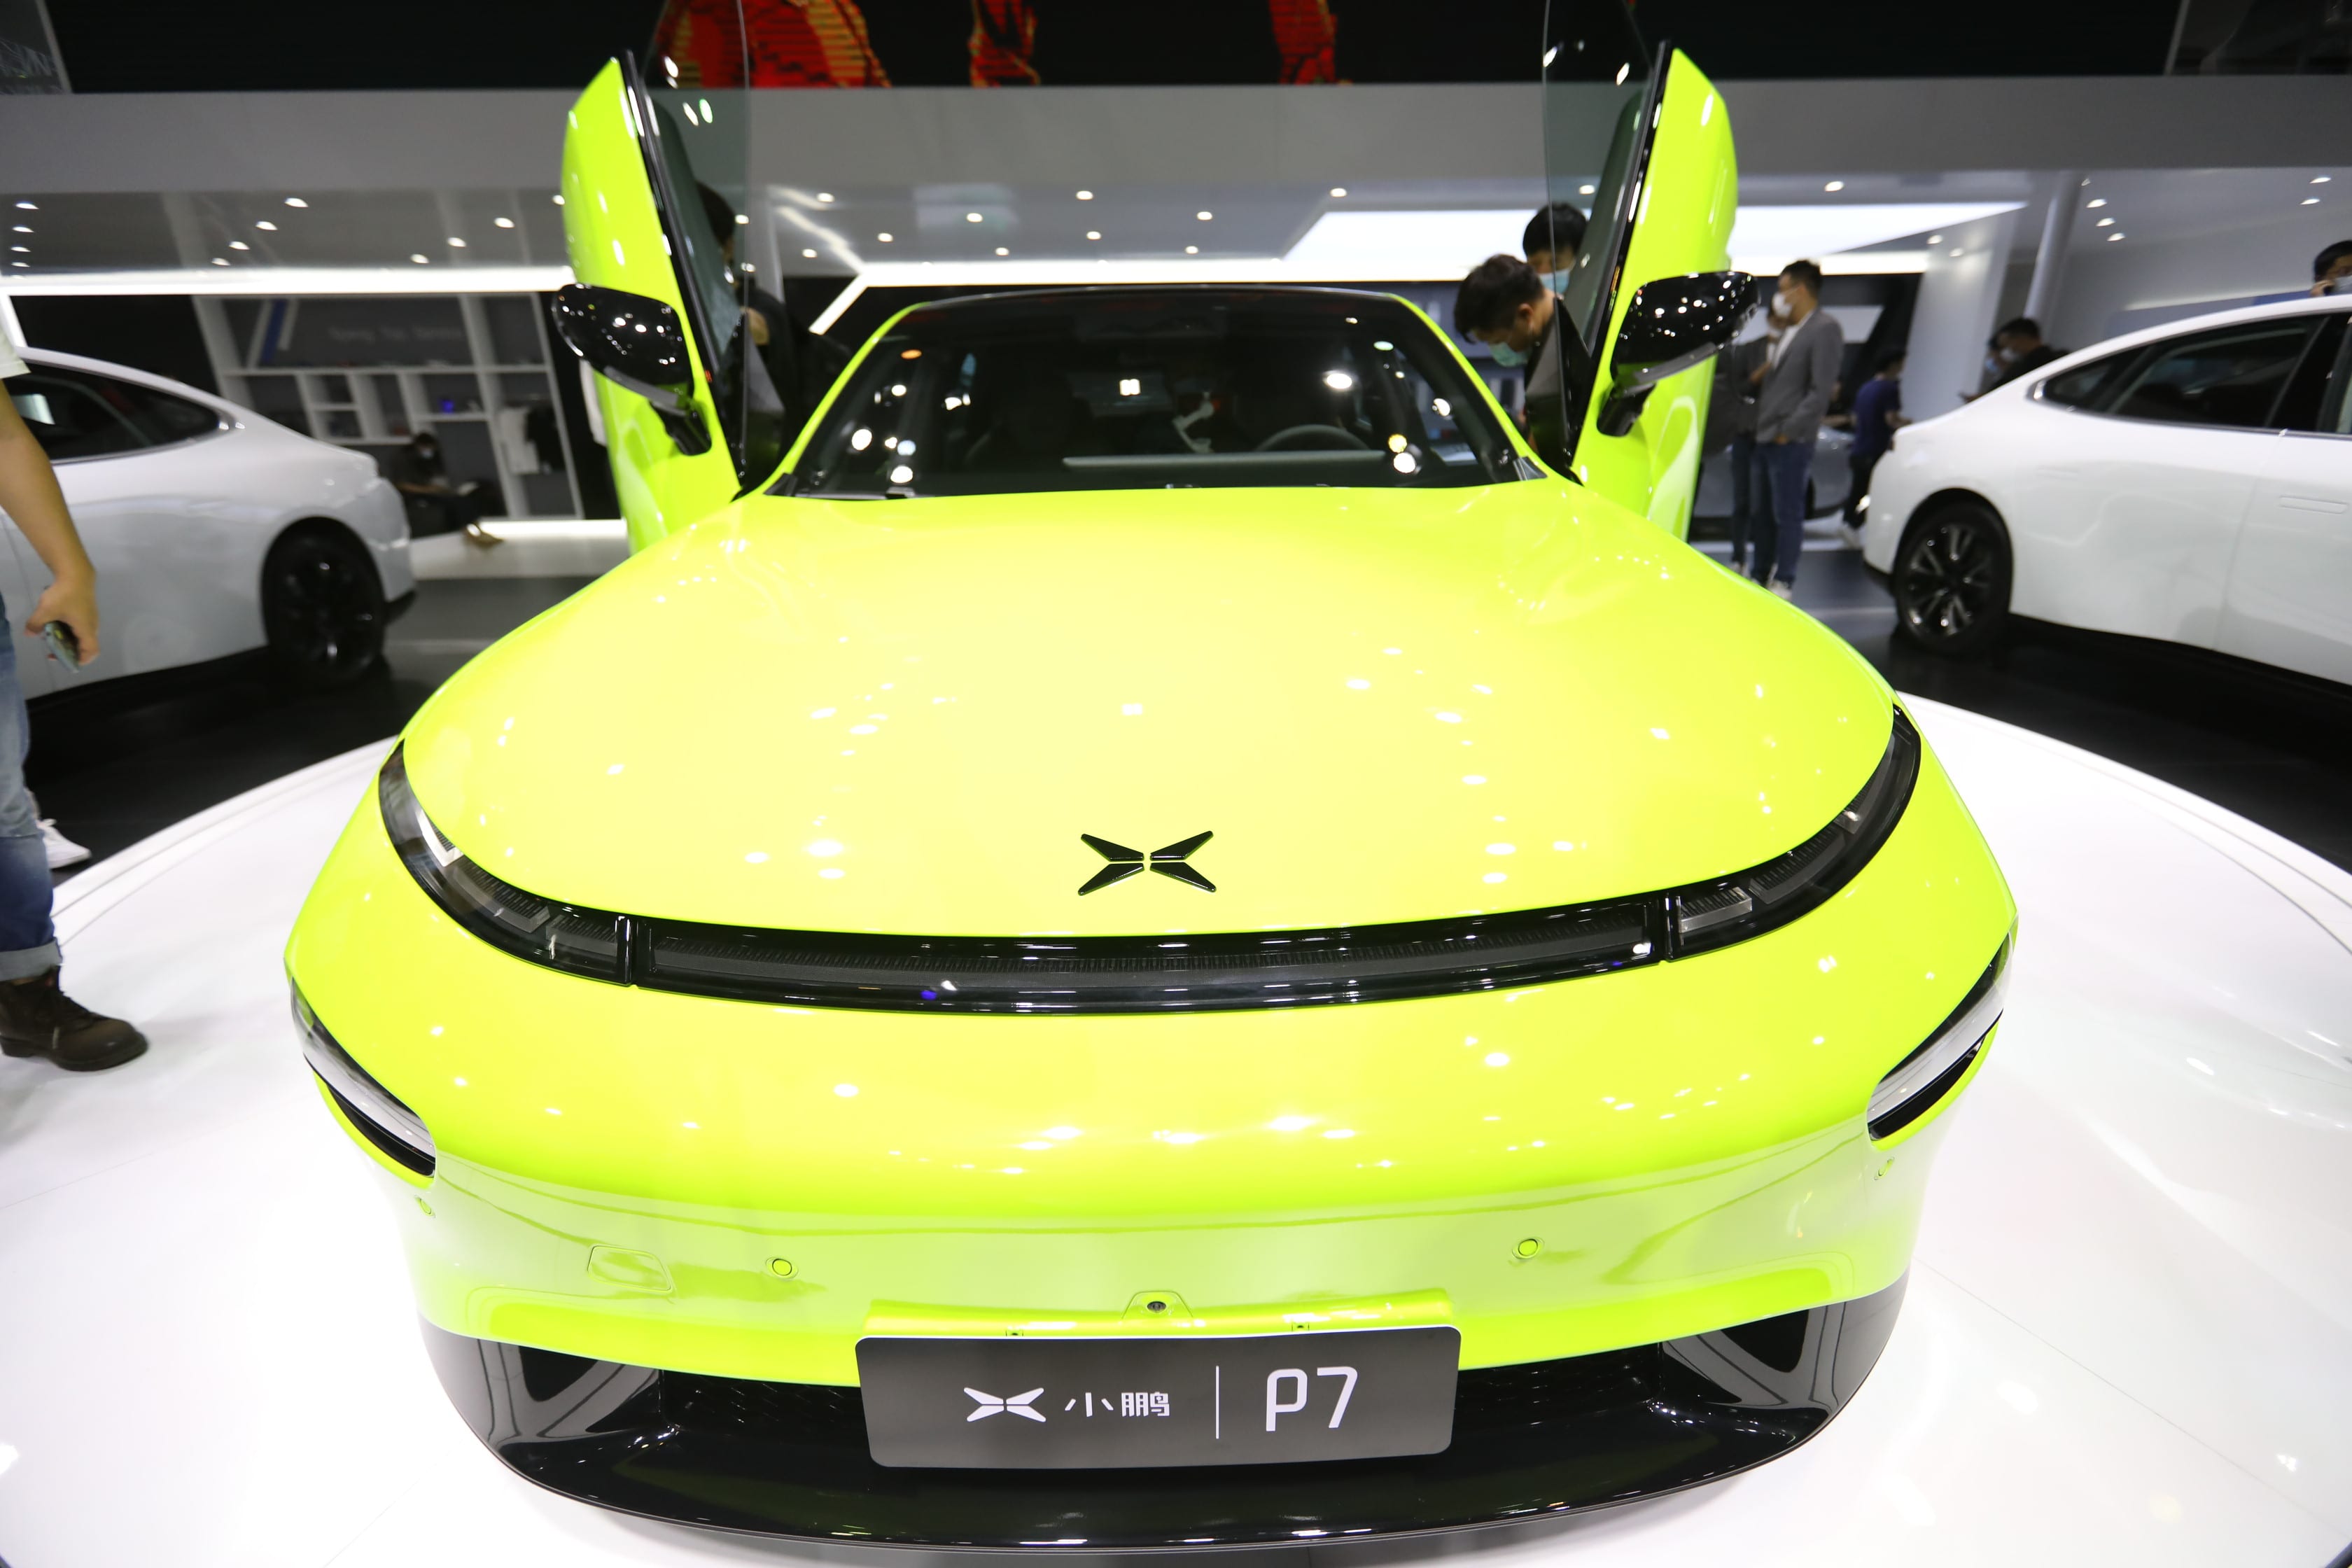 Tesla rival Xpeng Motors is looking to make its own autonomous driving discs